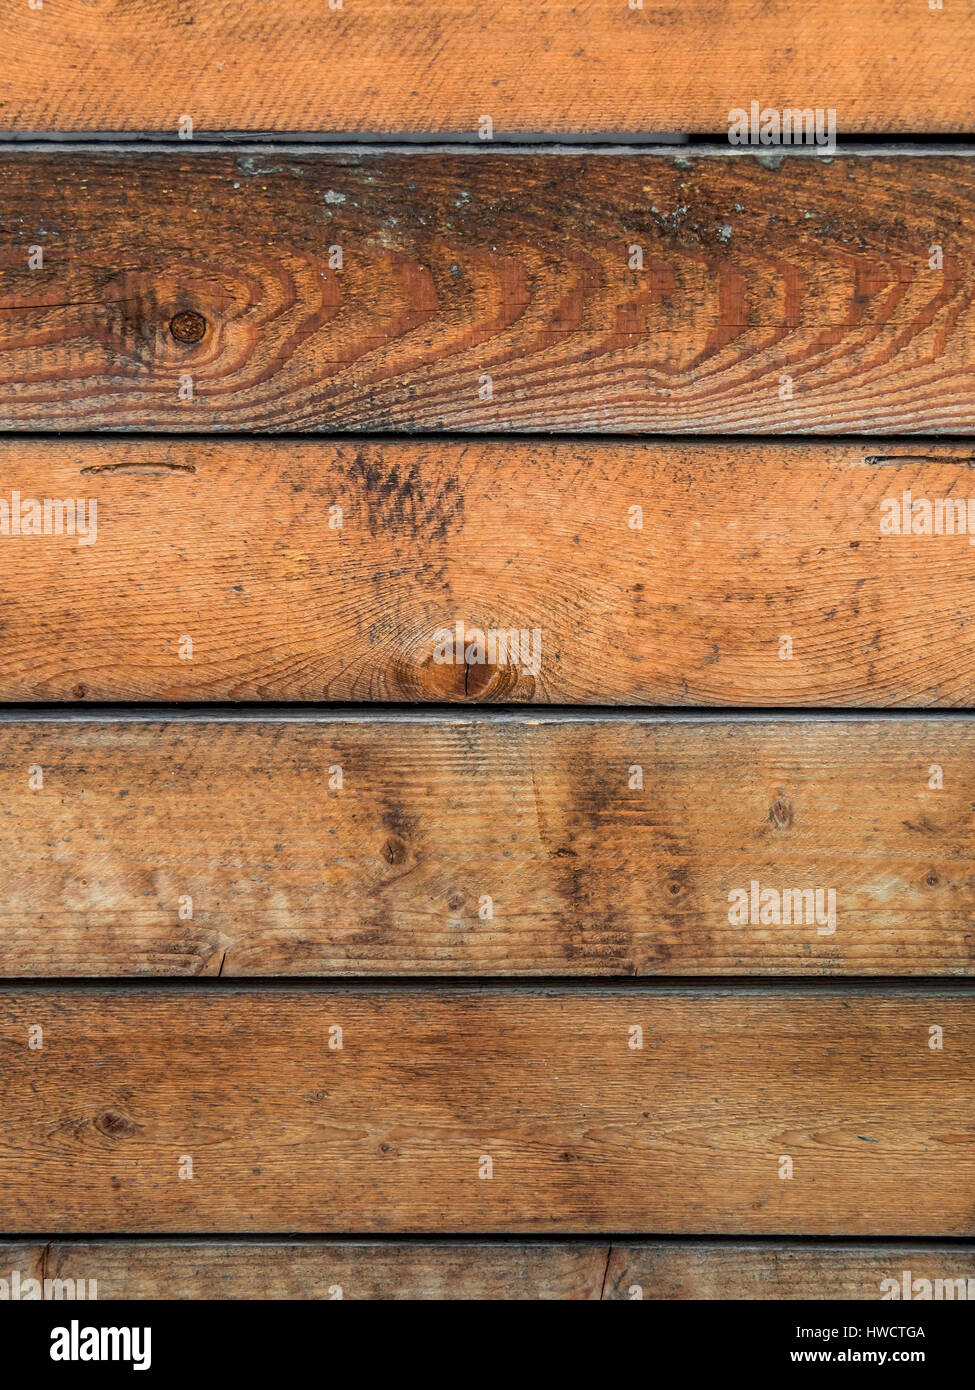 A wall from wooden slats with text clearance. Wooden wall as a Huintergrund for posters, Eine Wand aus Holzlatten mit Textfreiraum. Holzwand als Huint Stock Photo